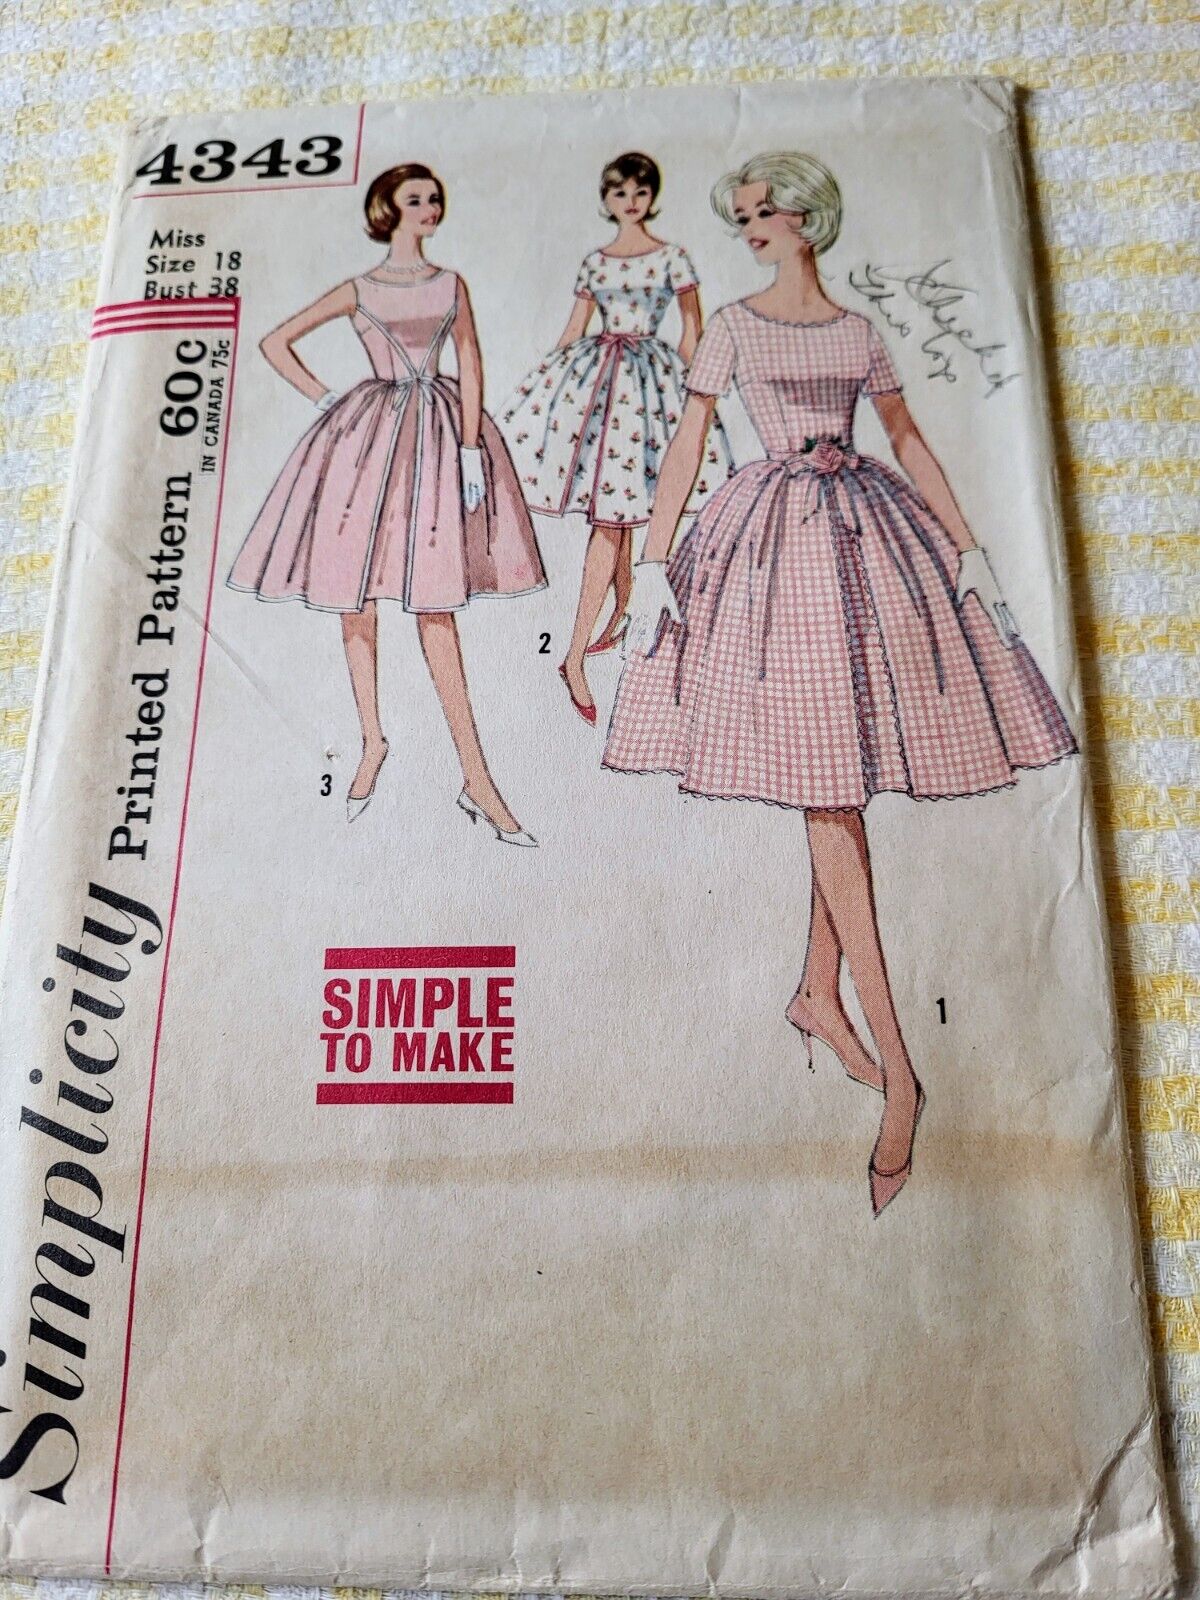 Vtg 1960's Simplicity 4343 INVERTED-PLEAT DRESS  Sewing Pattern Large Sz 18 B 38